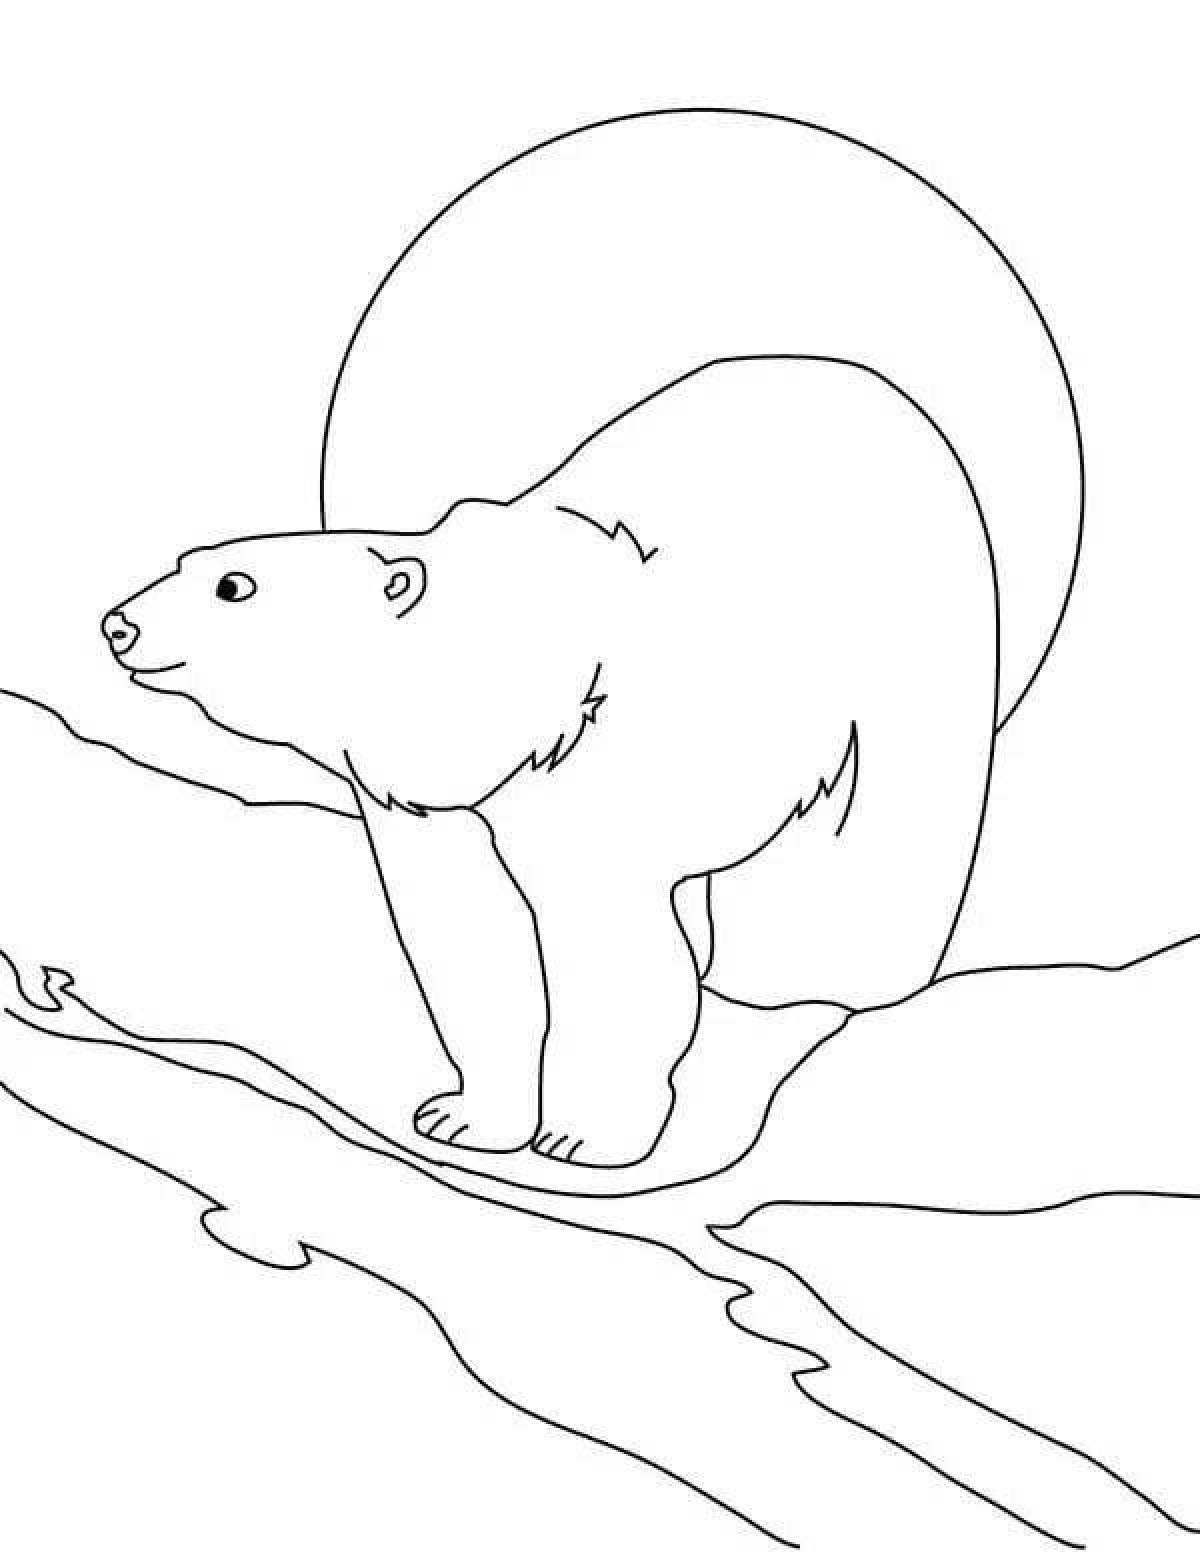 Coloring page cozy teddy bear in the north